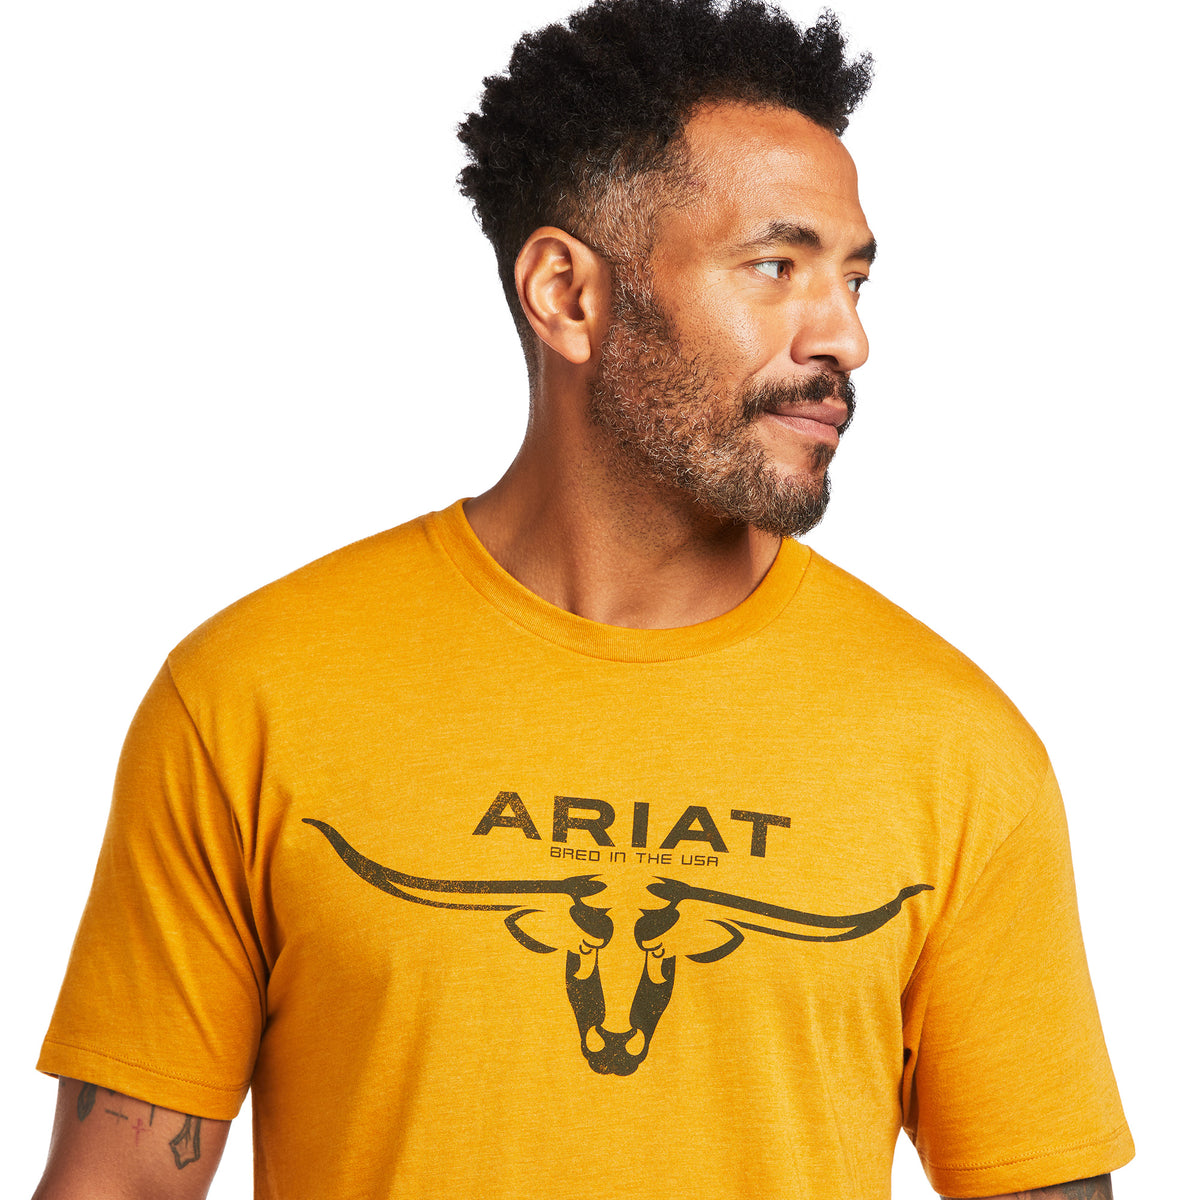 Ariat Bred in the USA Tee